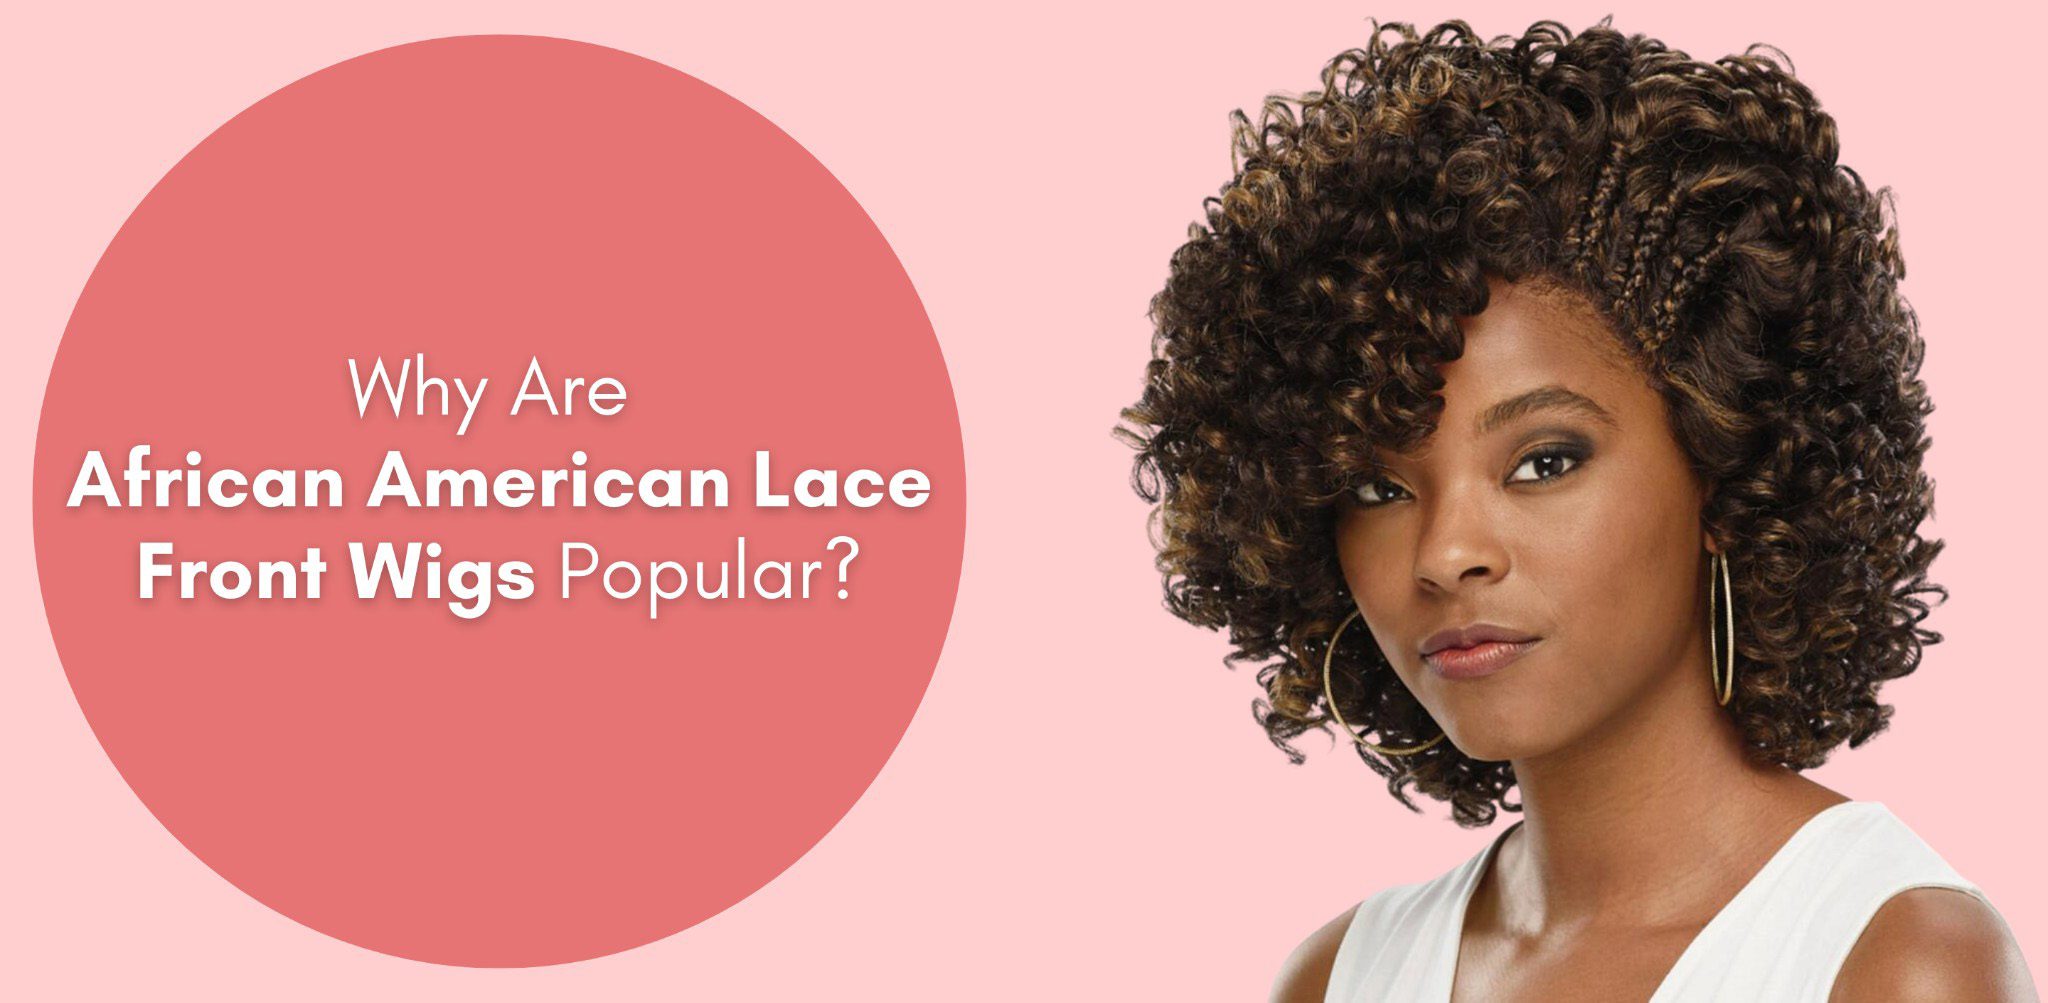 Why Are African American Lace Front Wigs Popular?